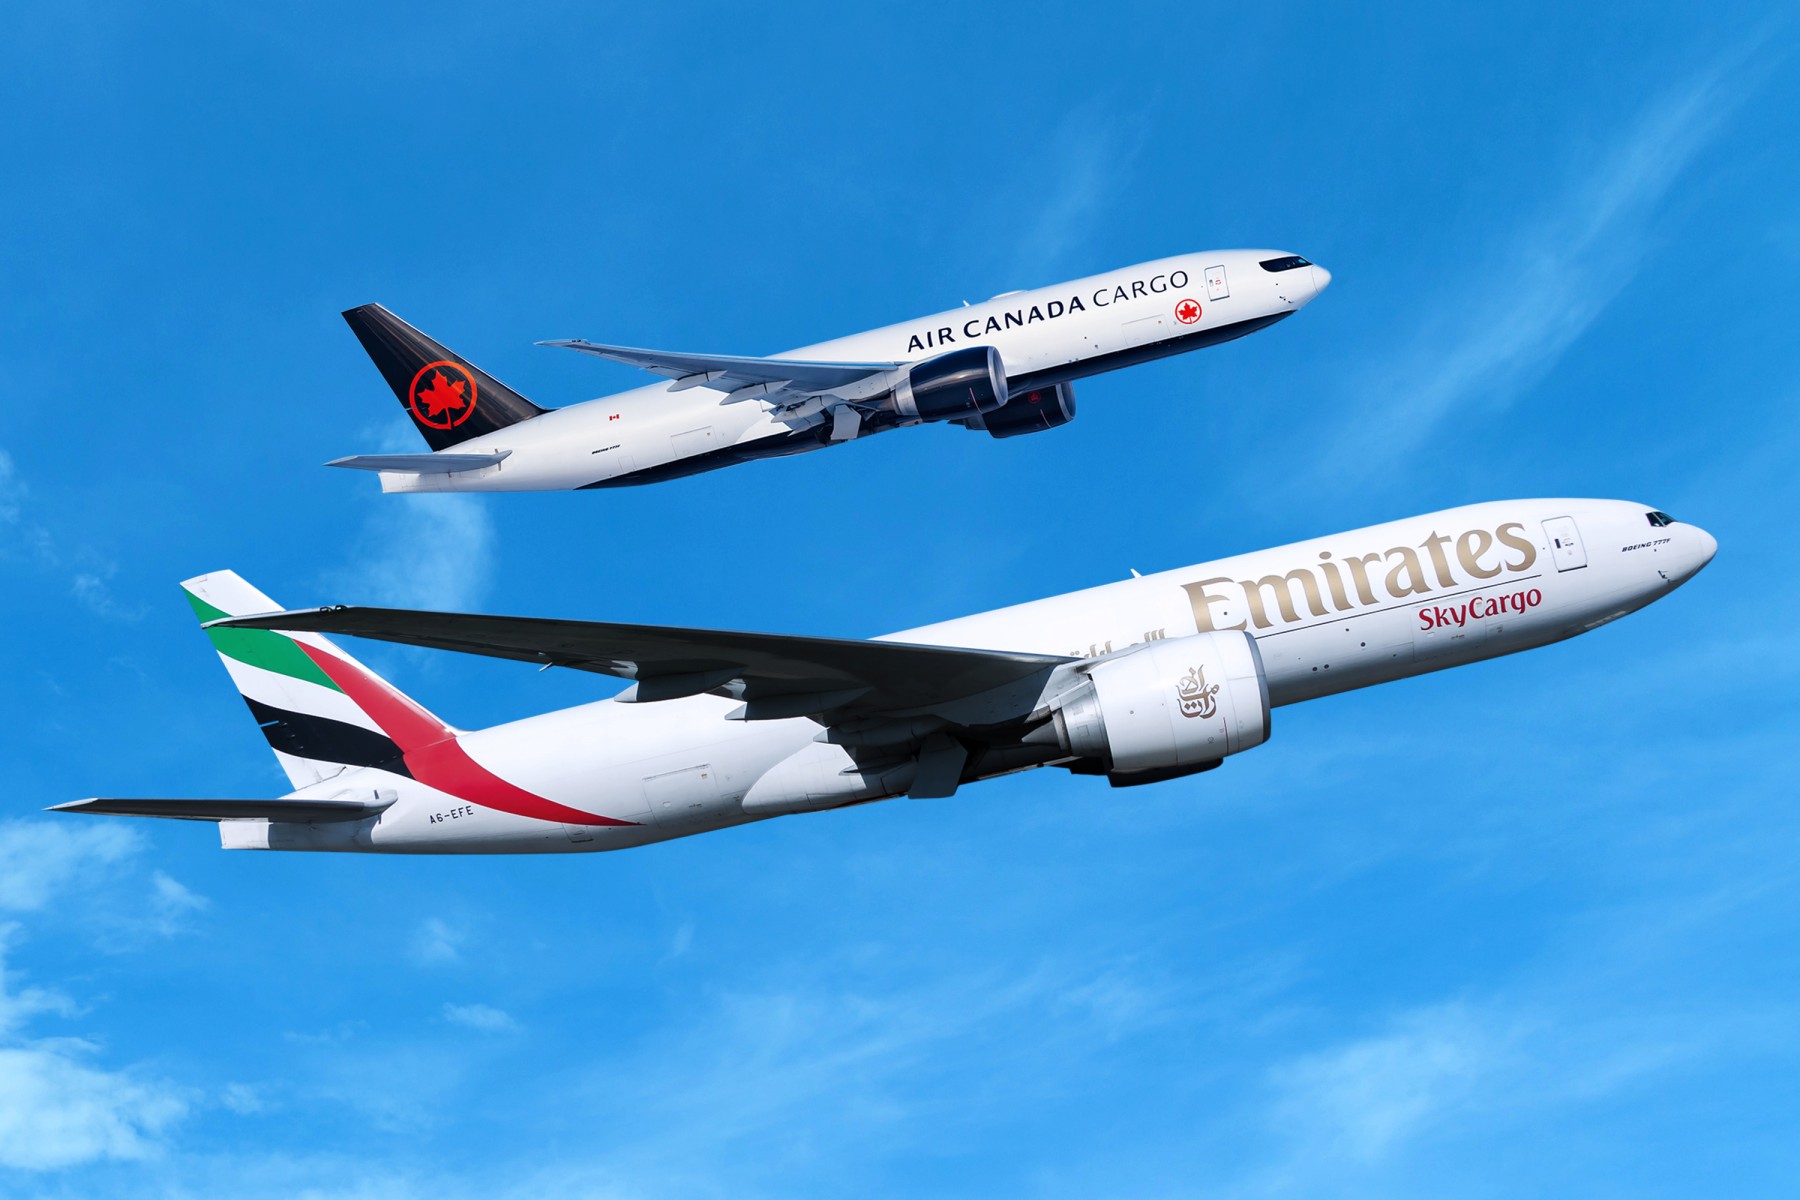 Render of an Air Canada Cargo and Emirates SkyCargo aircraft flying together.